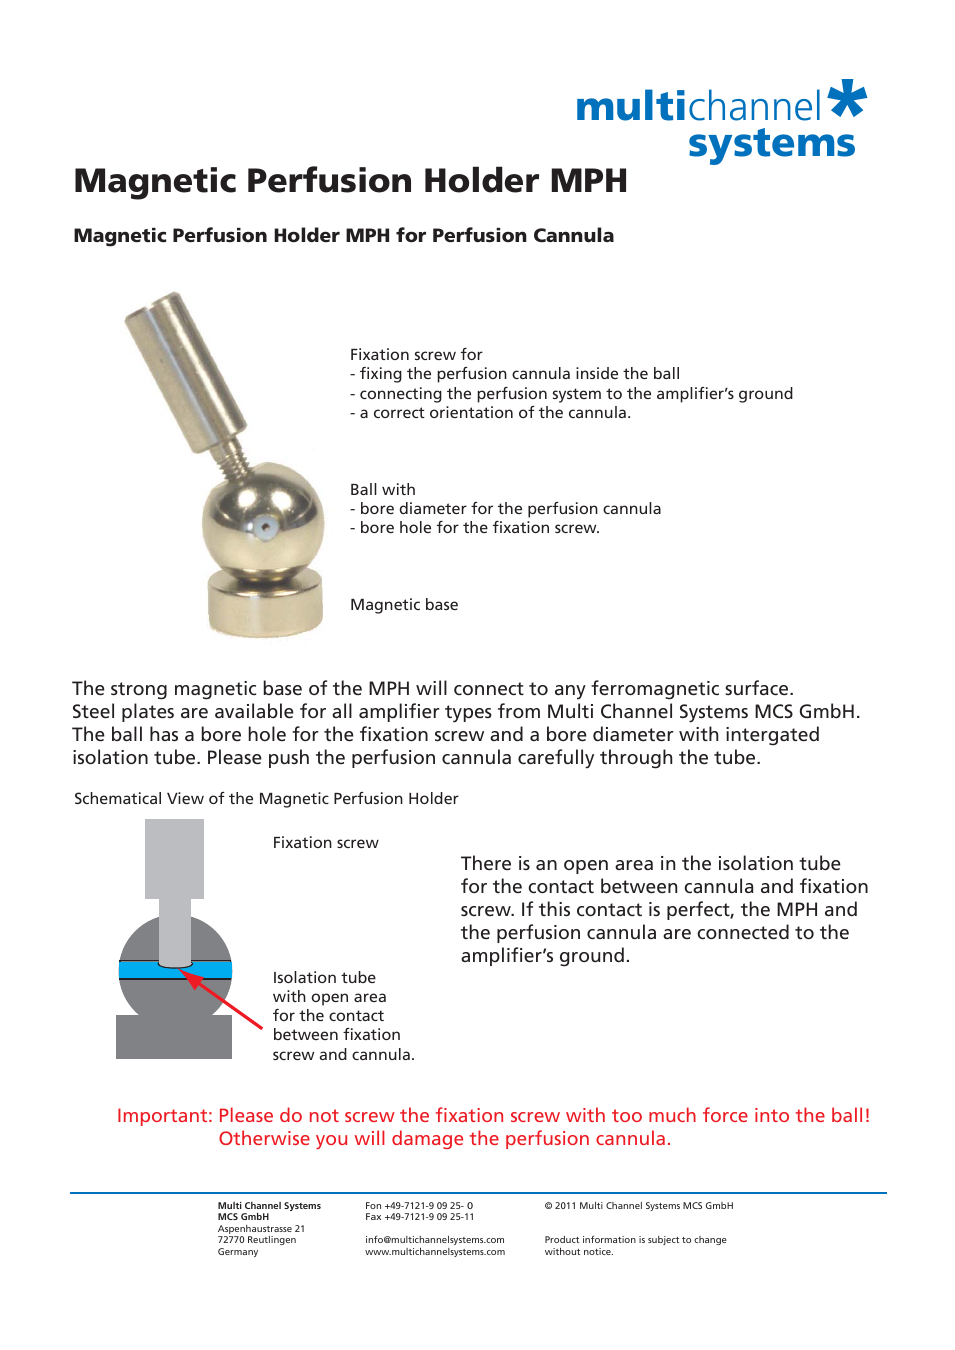 Magnetic Perfusion Holder MPH